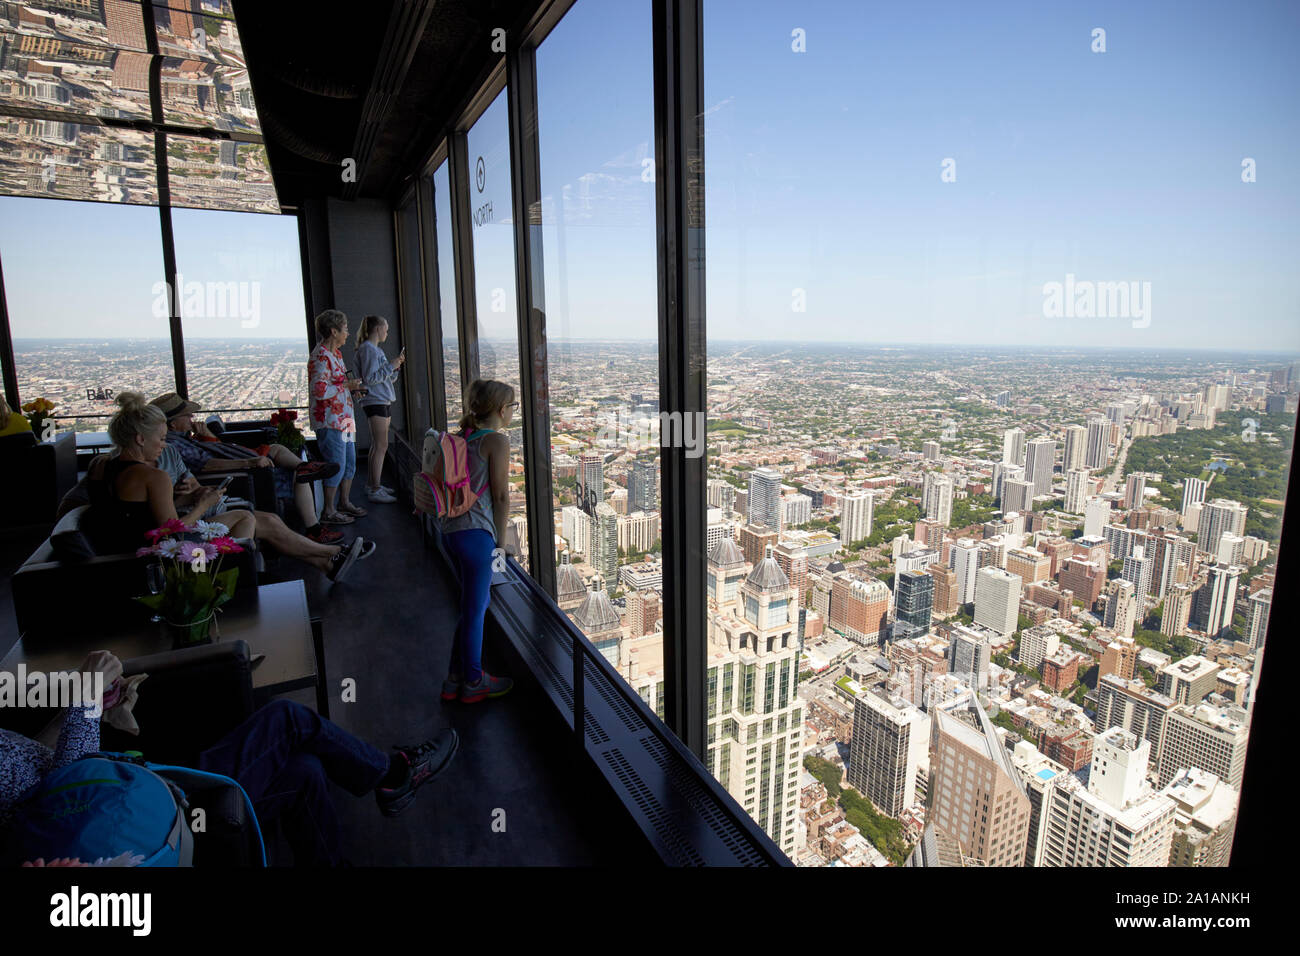 tourists looking out of the windows of the deck observation area of 360 chicago the john hancock center chicago illinois united states of america Stock Photo